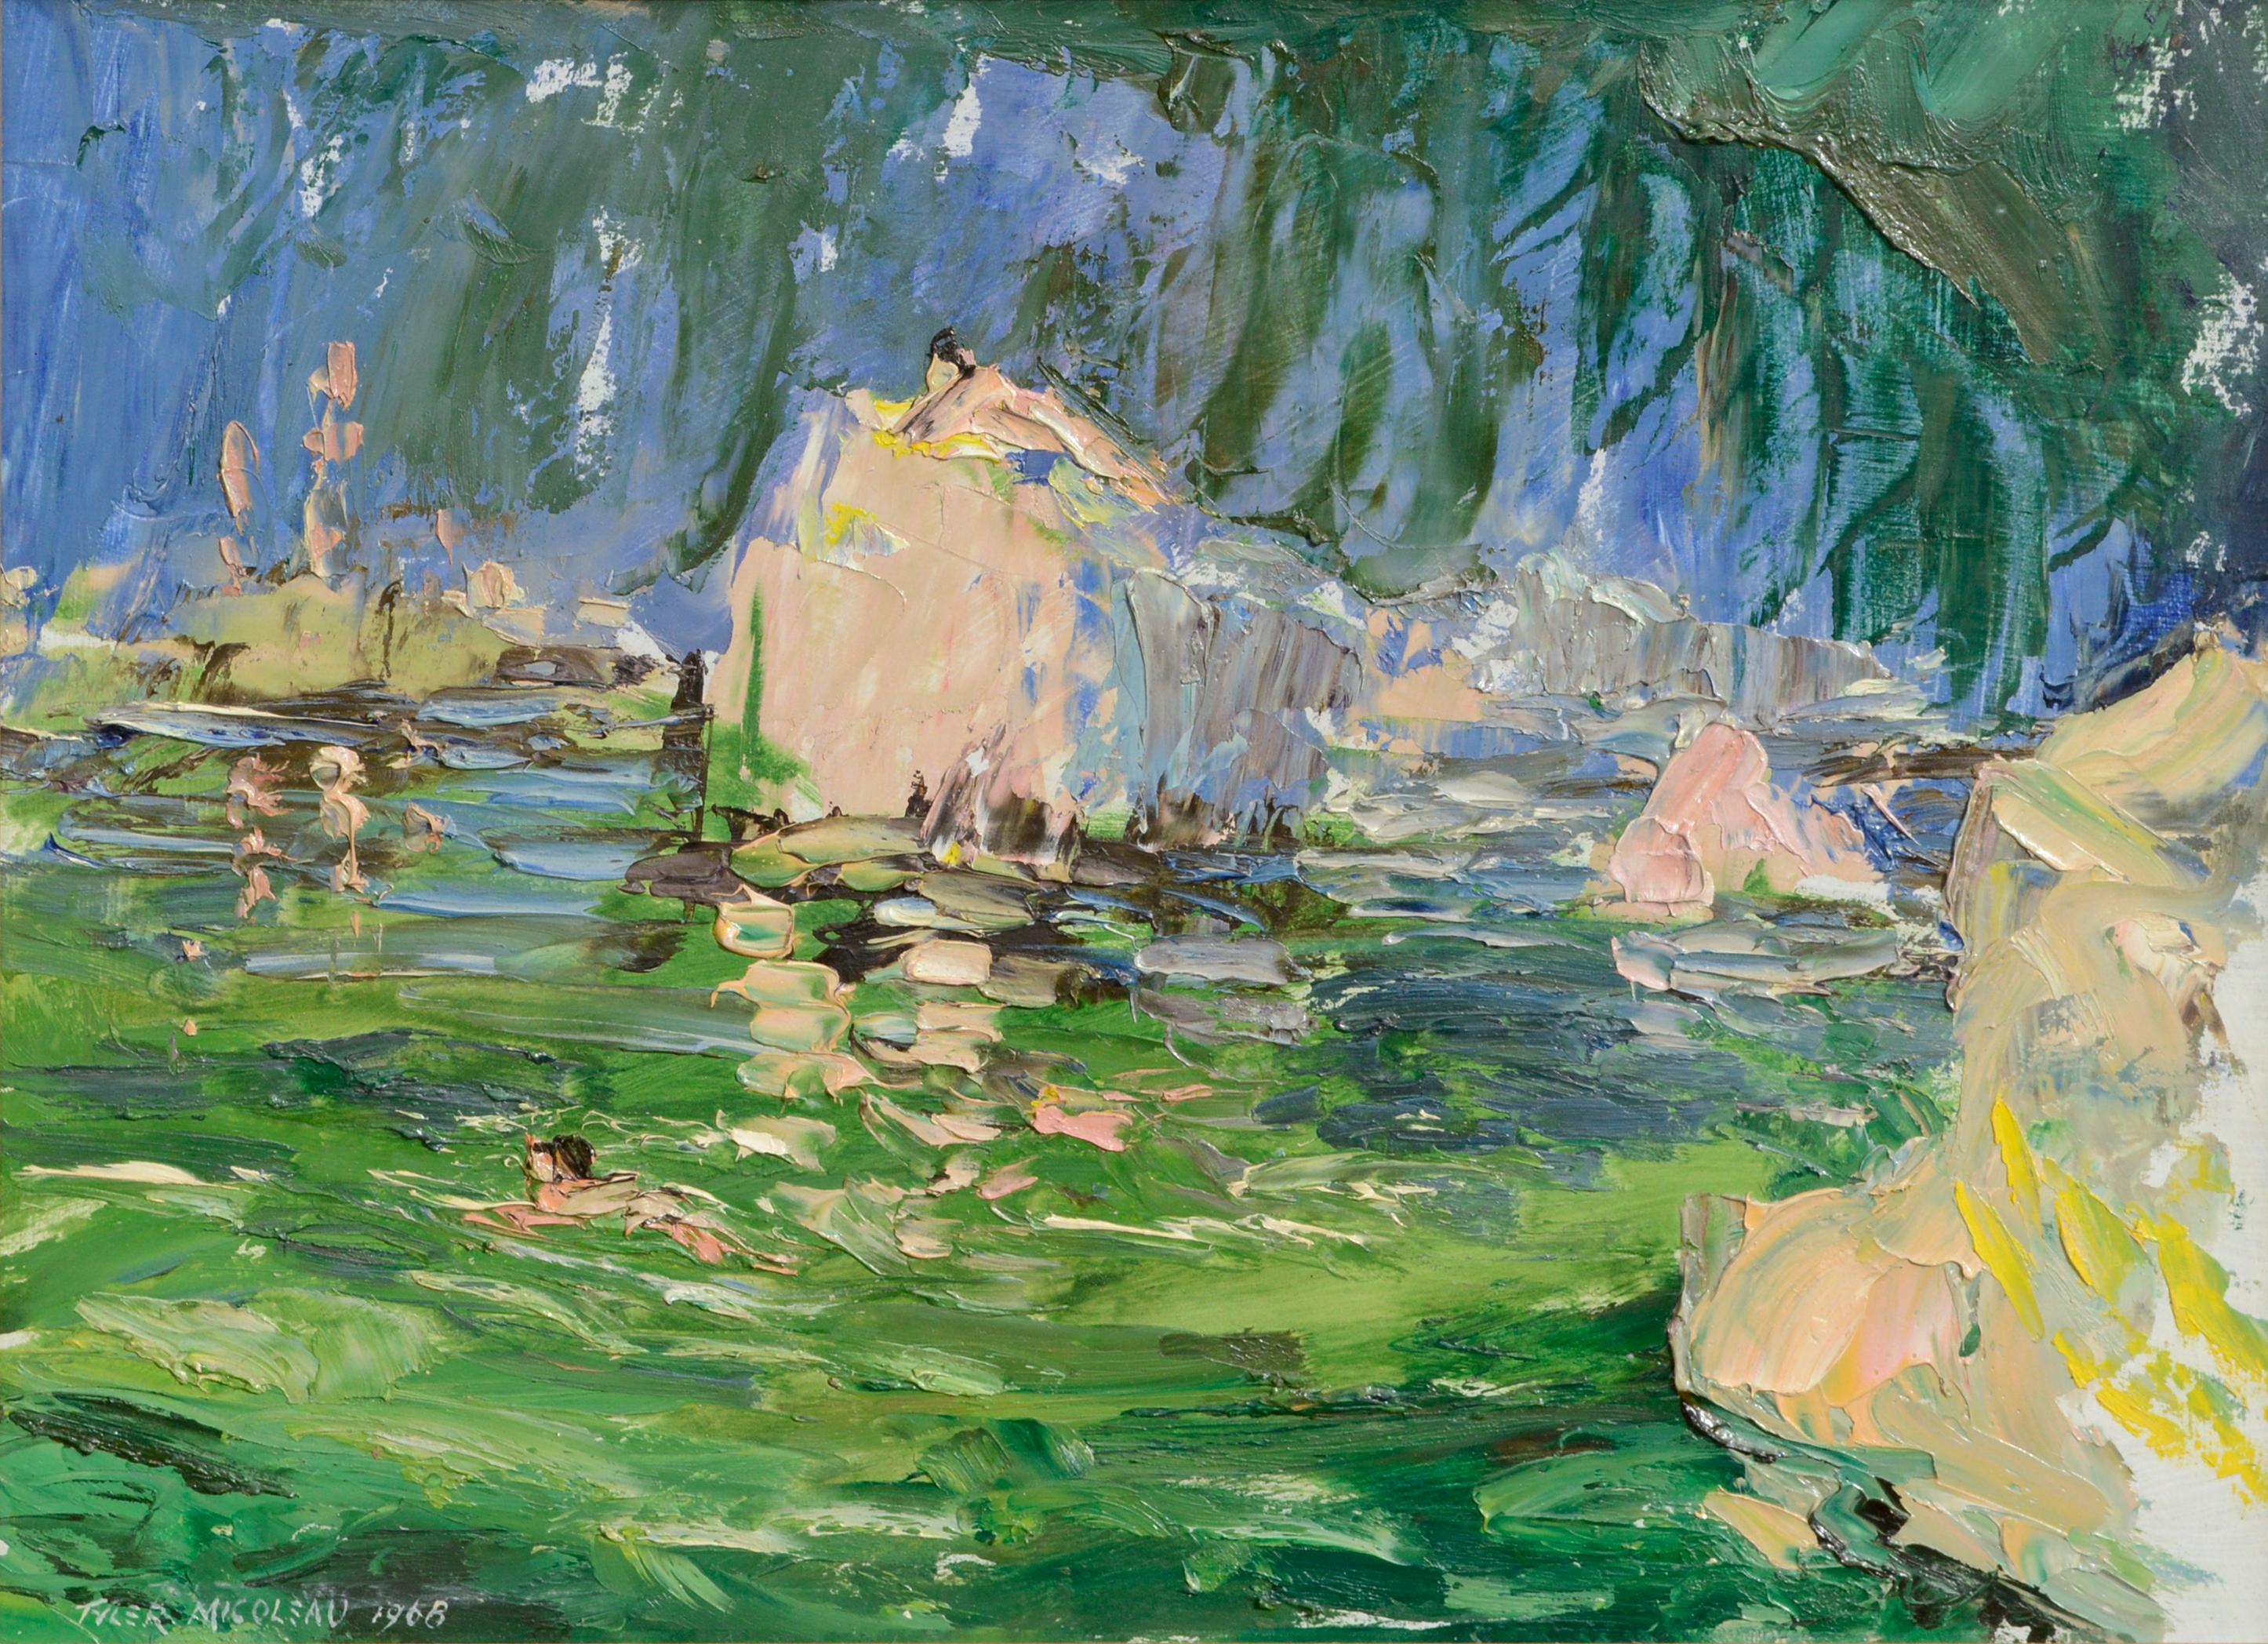 Rocky Outcropping and Bathers at the Swimming Hole – Landschaft – Painting von Tyler Micoleau